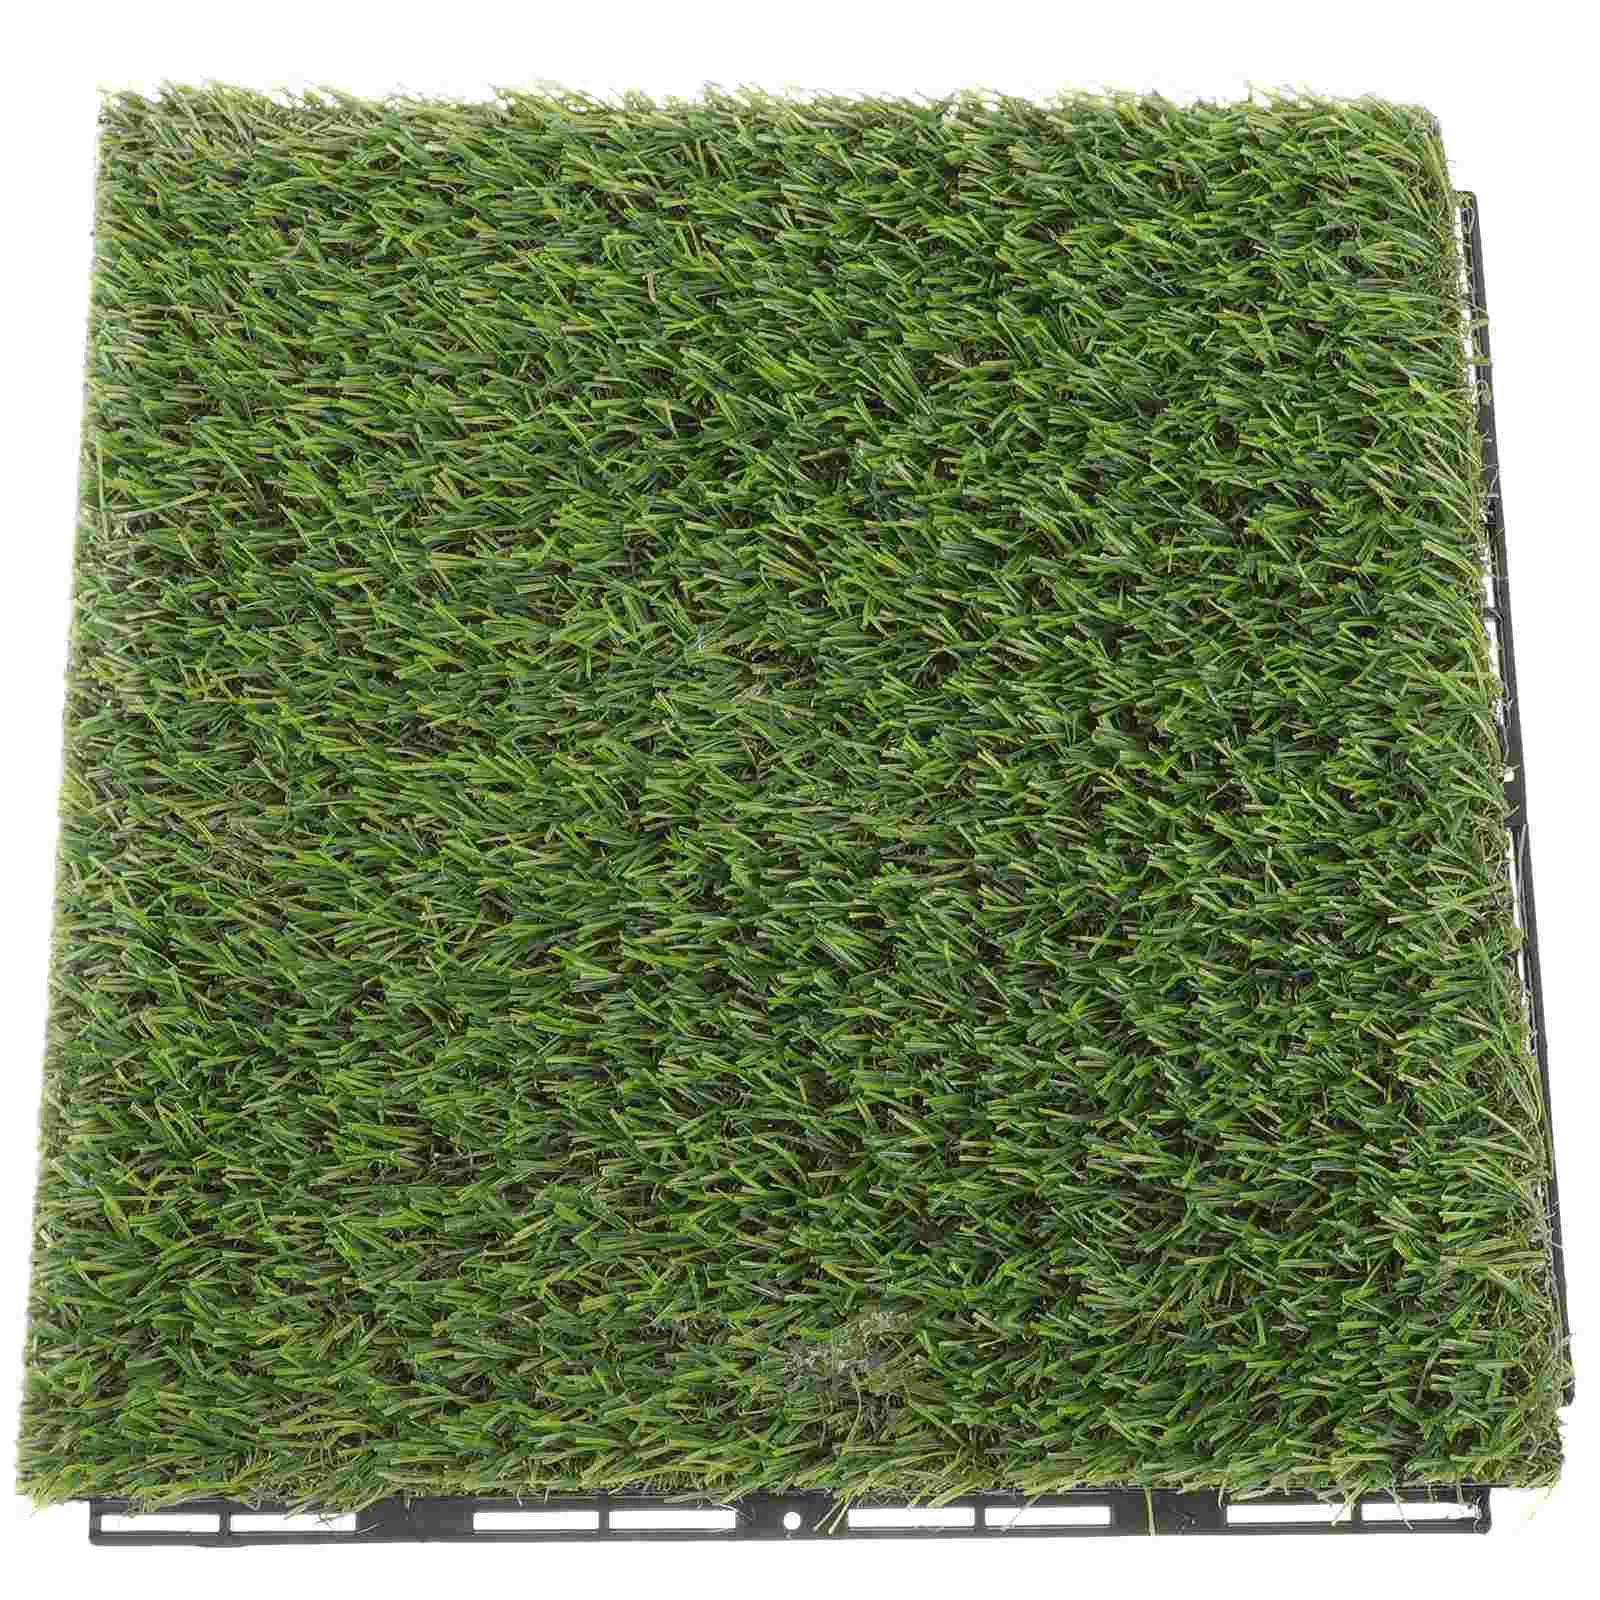 Simulation Grass Mat Square Area Rug Artificial Synthetic Green Outdoor Decor Floor Tile